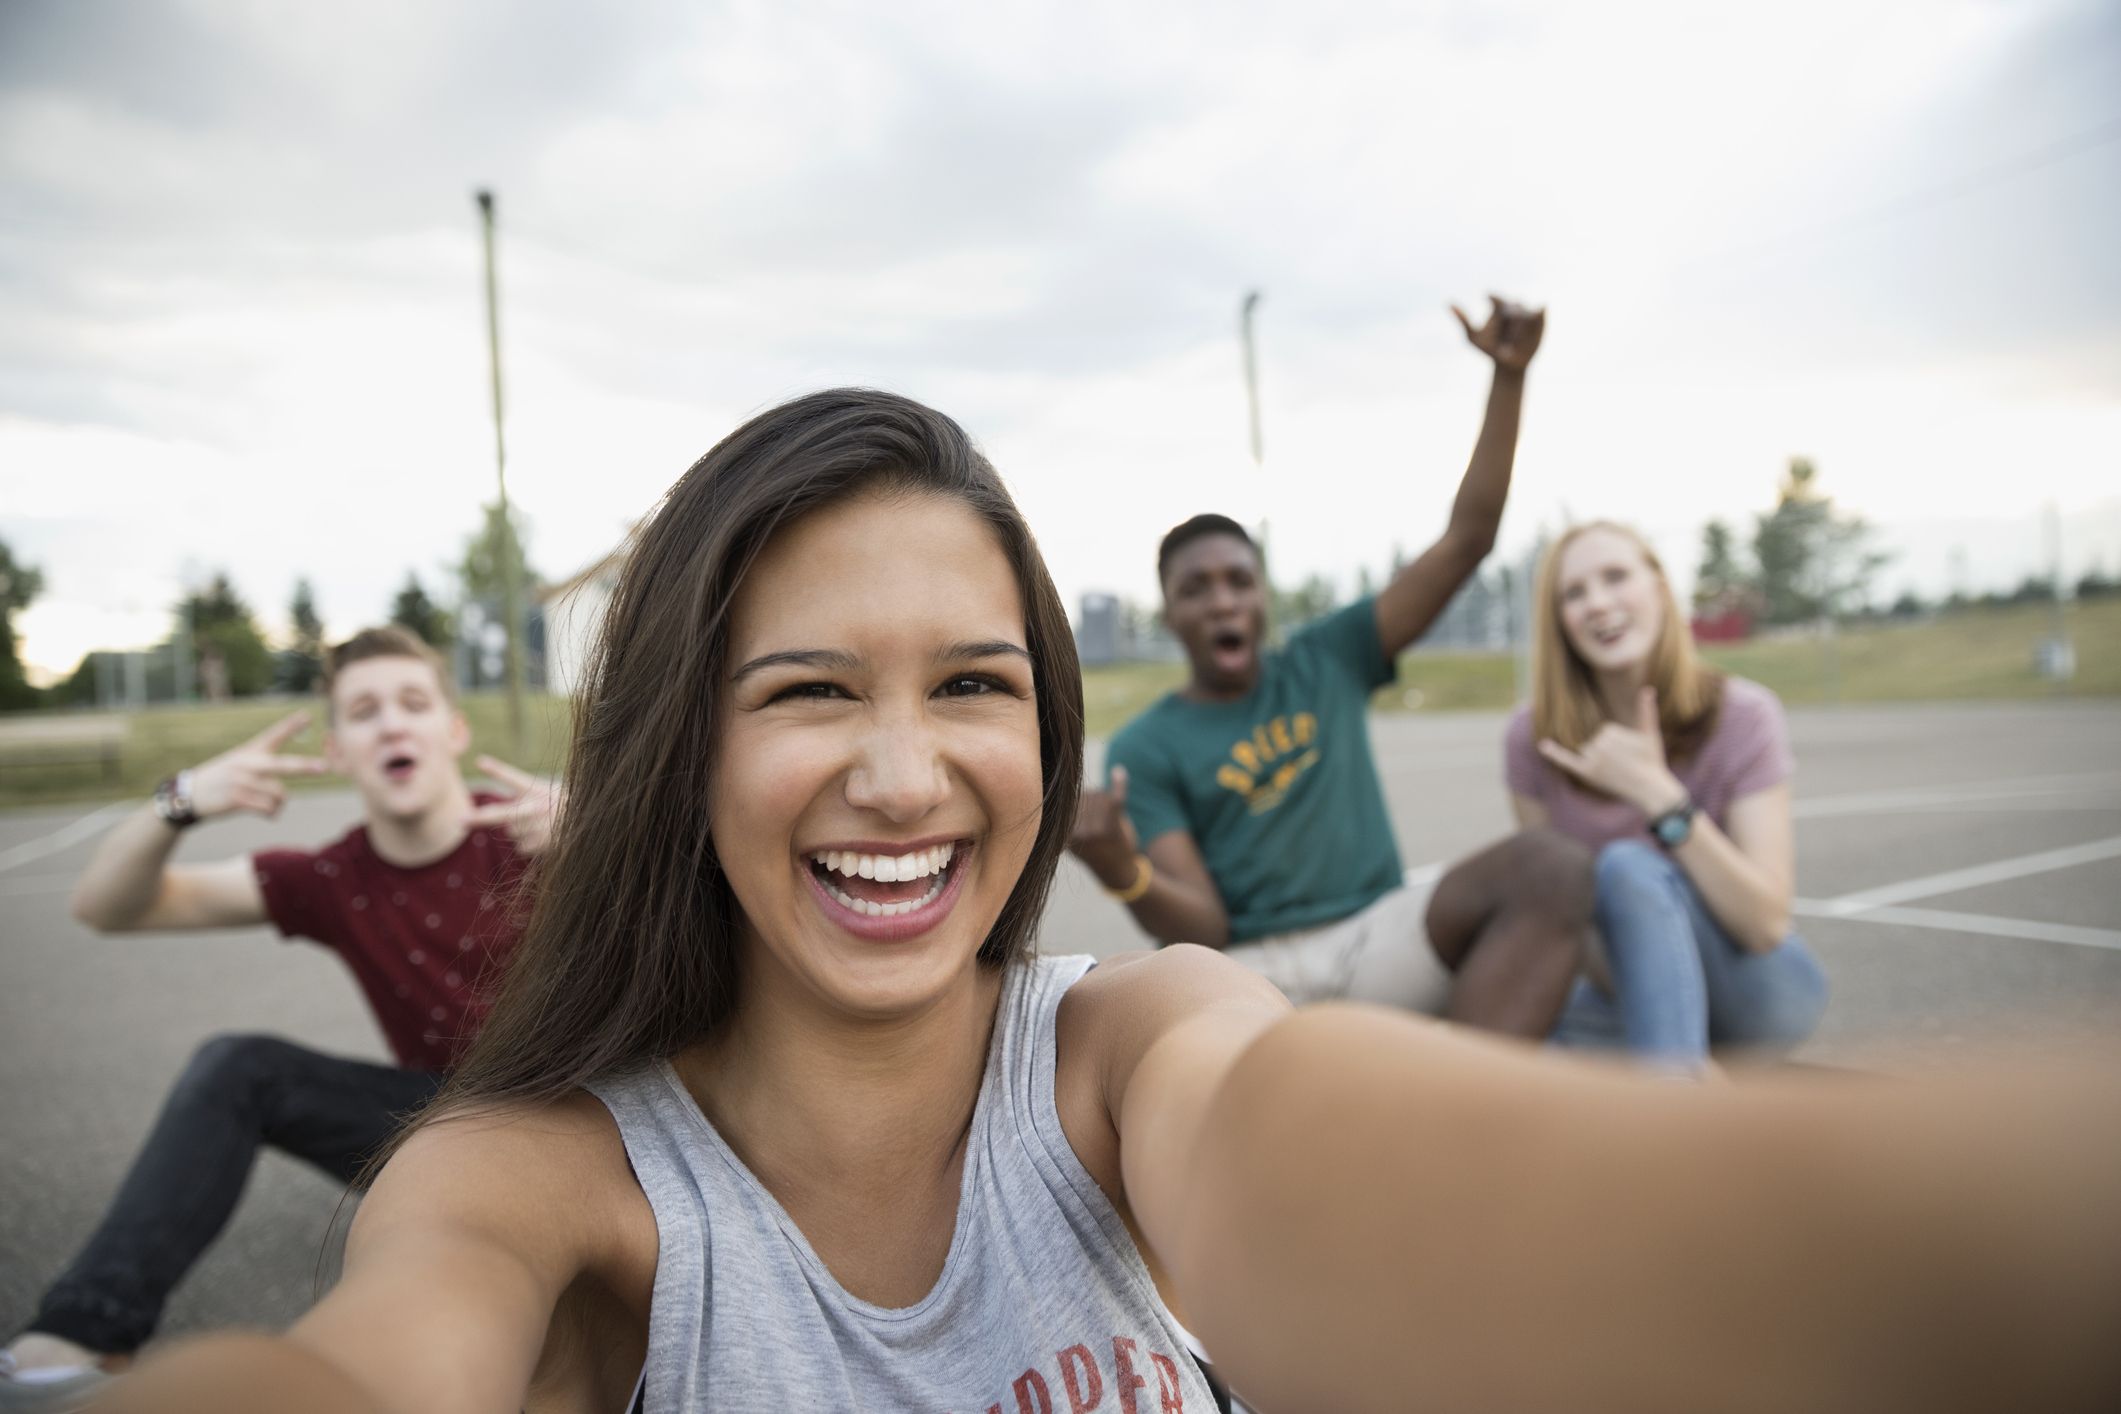 Portrait smiling teenage girl with friends taking selfie on outdoor basketball court